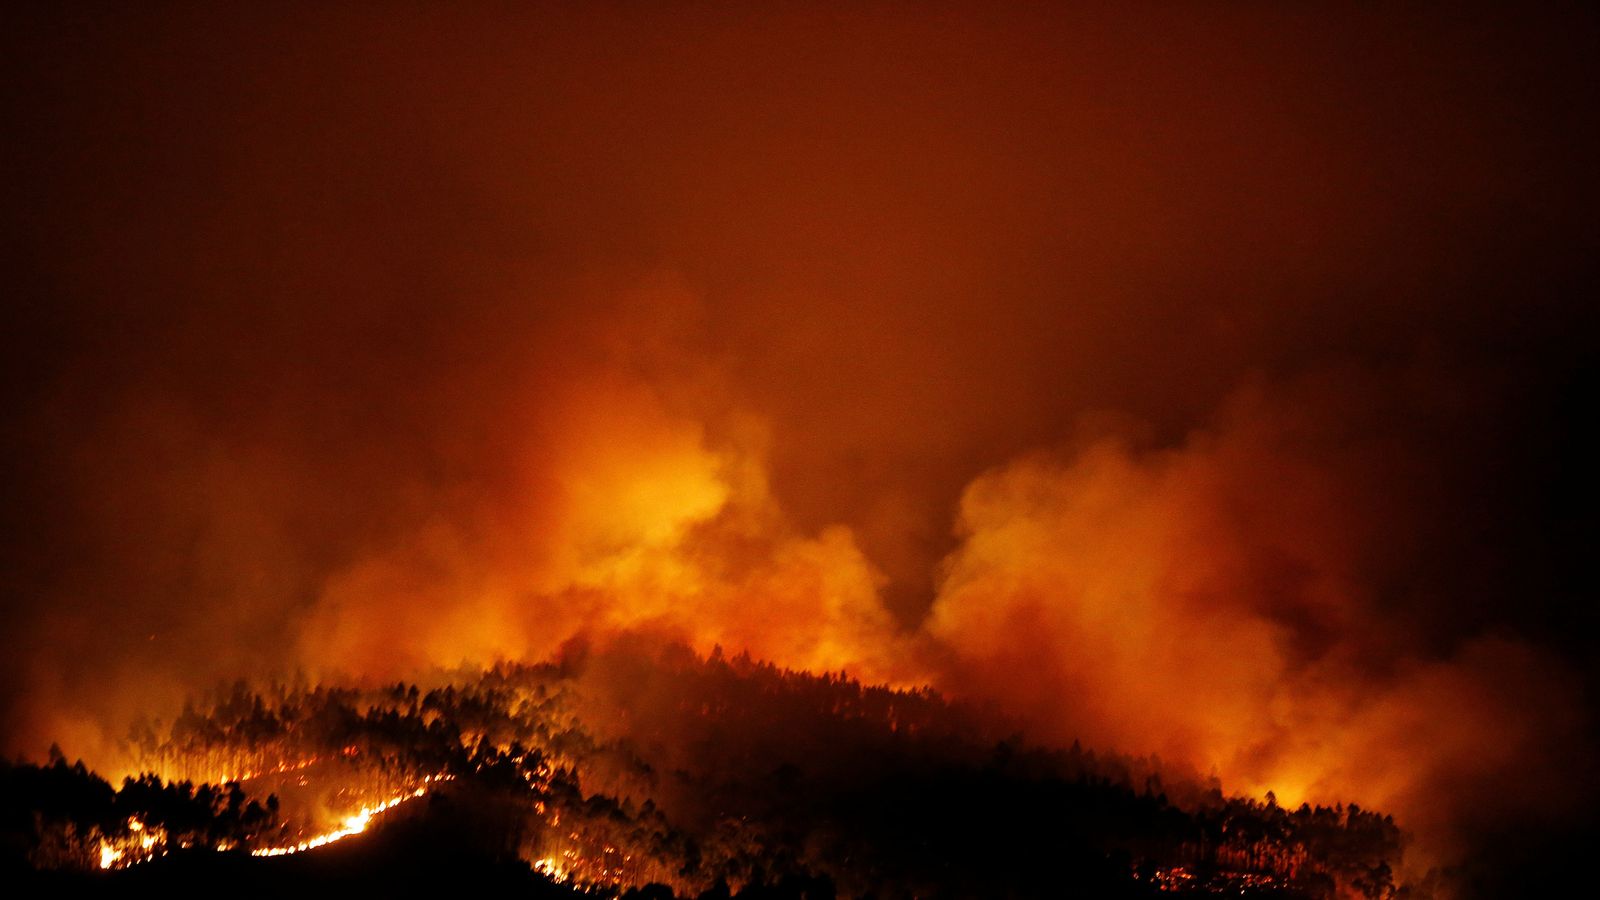 Dozens killed in Portuguese forest fires 61f898cce6cd2bcd644e2006a01f73dfb07879bd74a701d167be4463607577c7_3980608